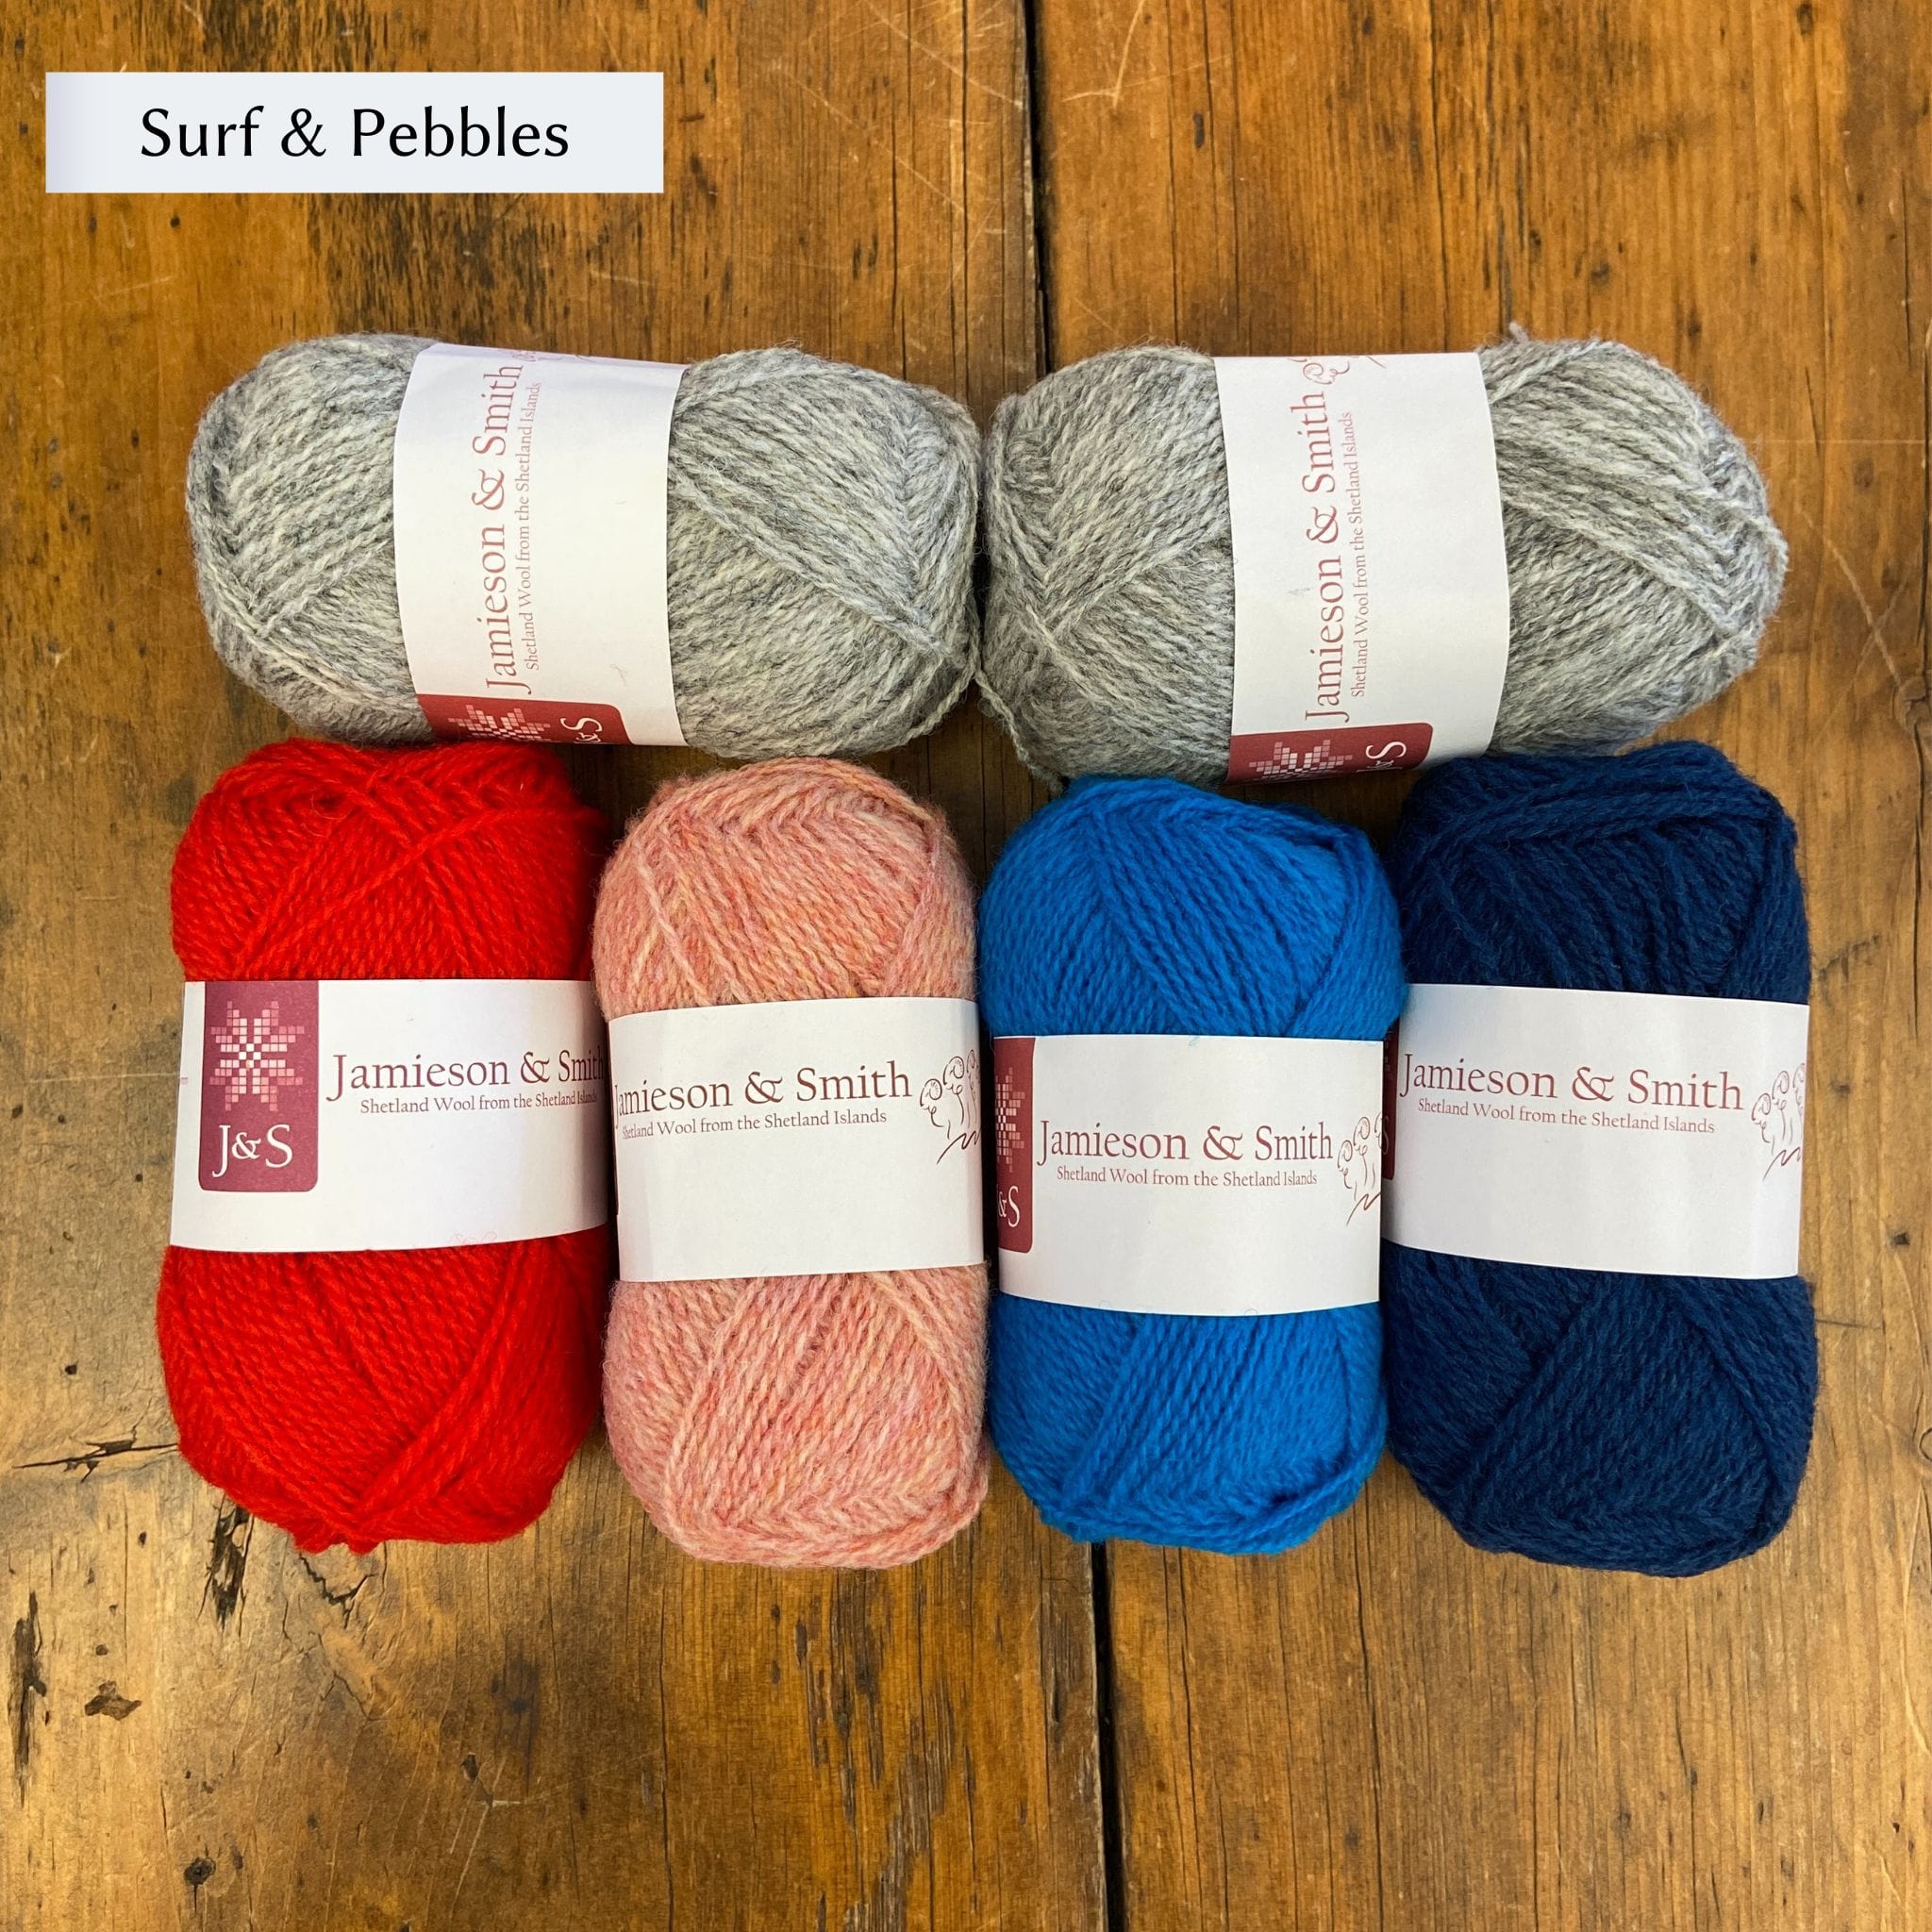 Islesburgh Toorie by the Doull Family in Jamieson & Smith 2ply